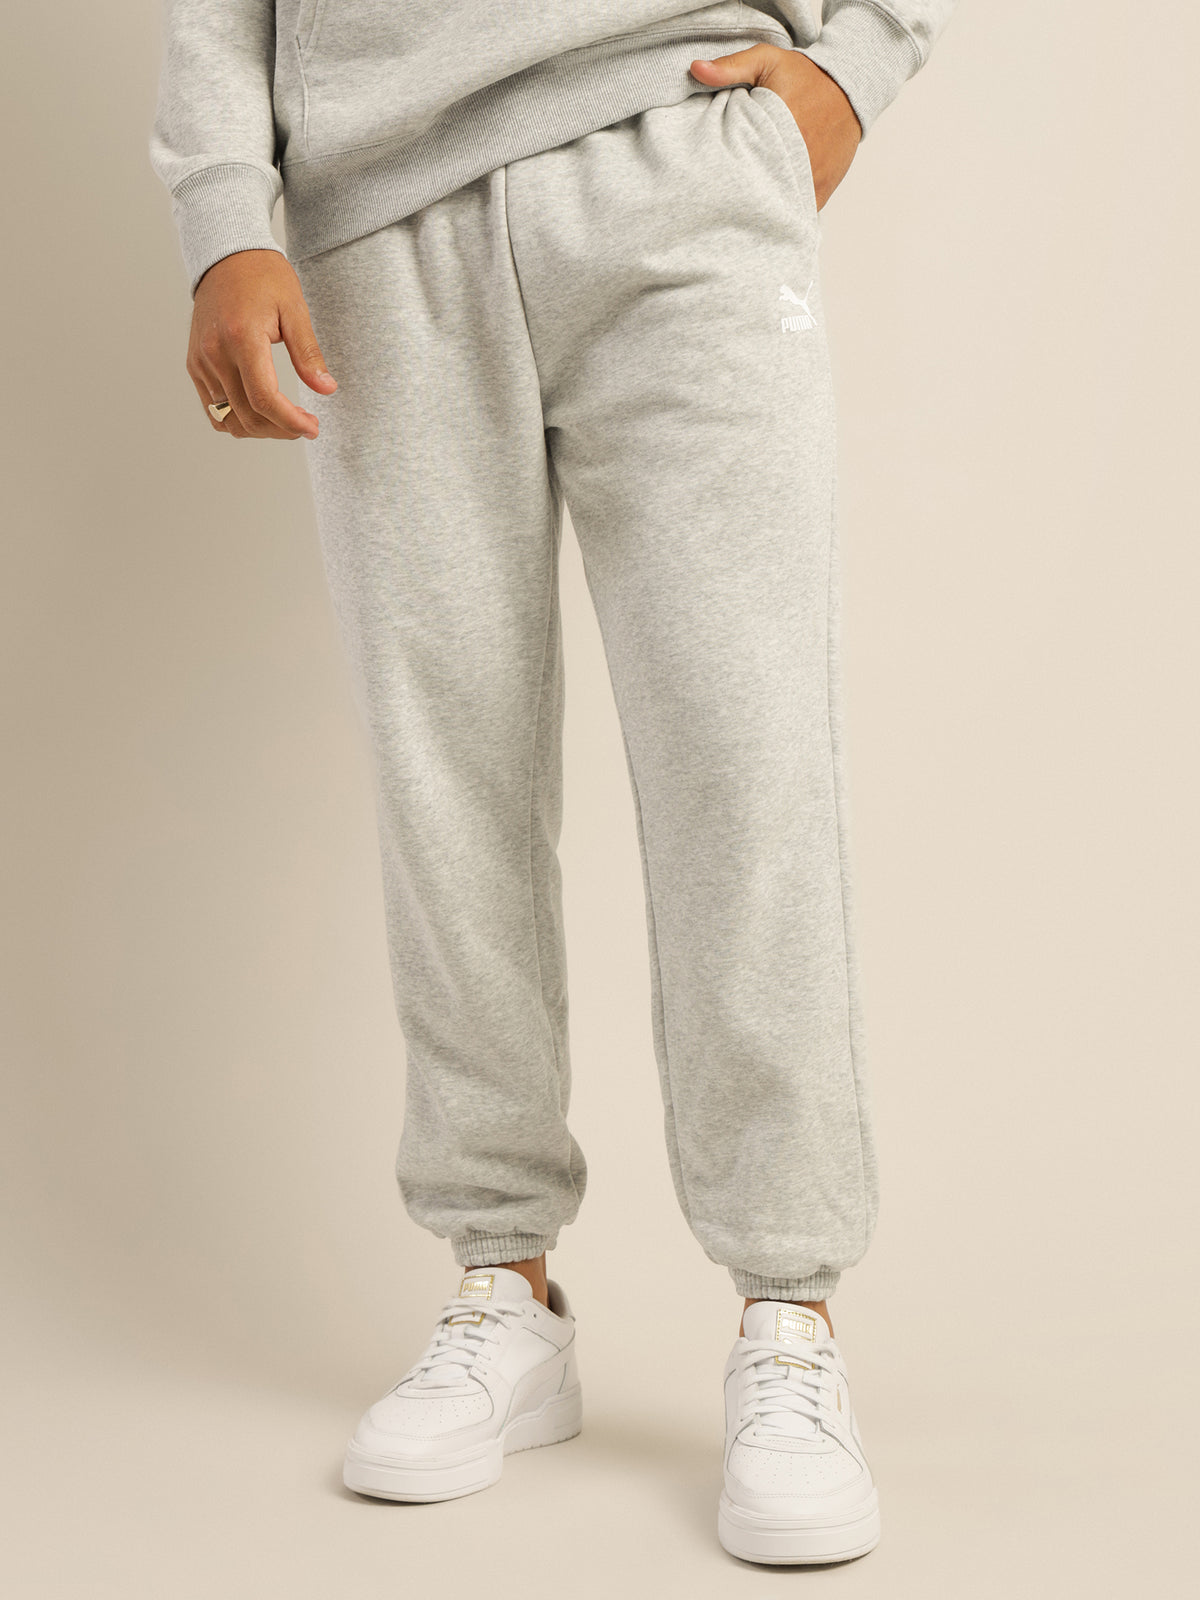 Classics Relaxed Sweat Pant in Light Grey Heather